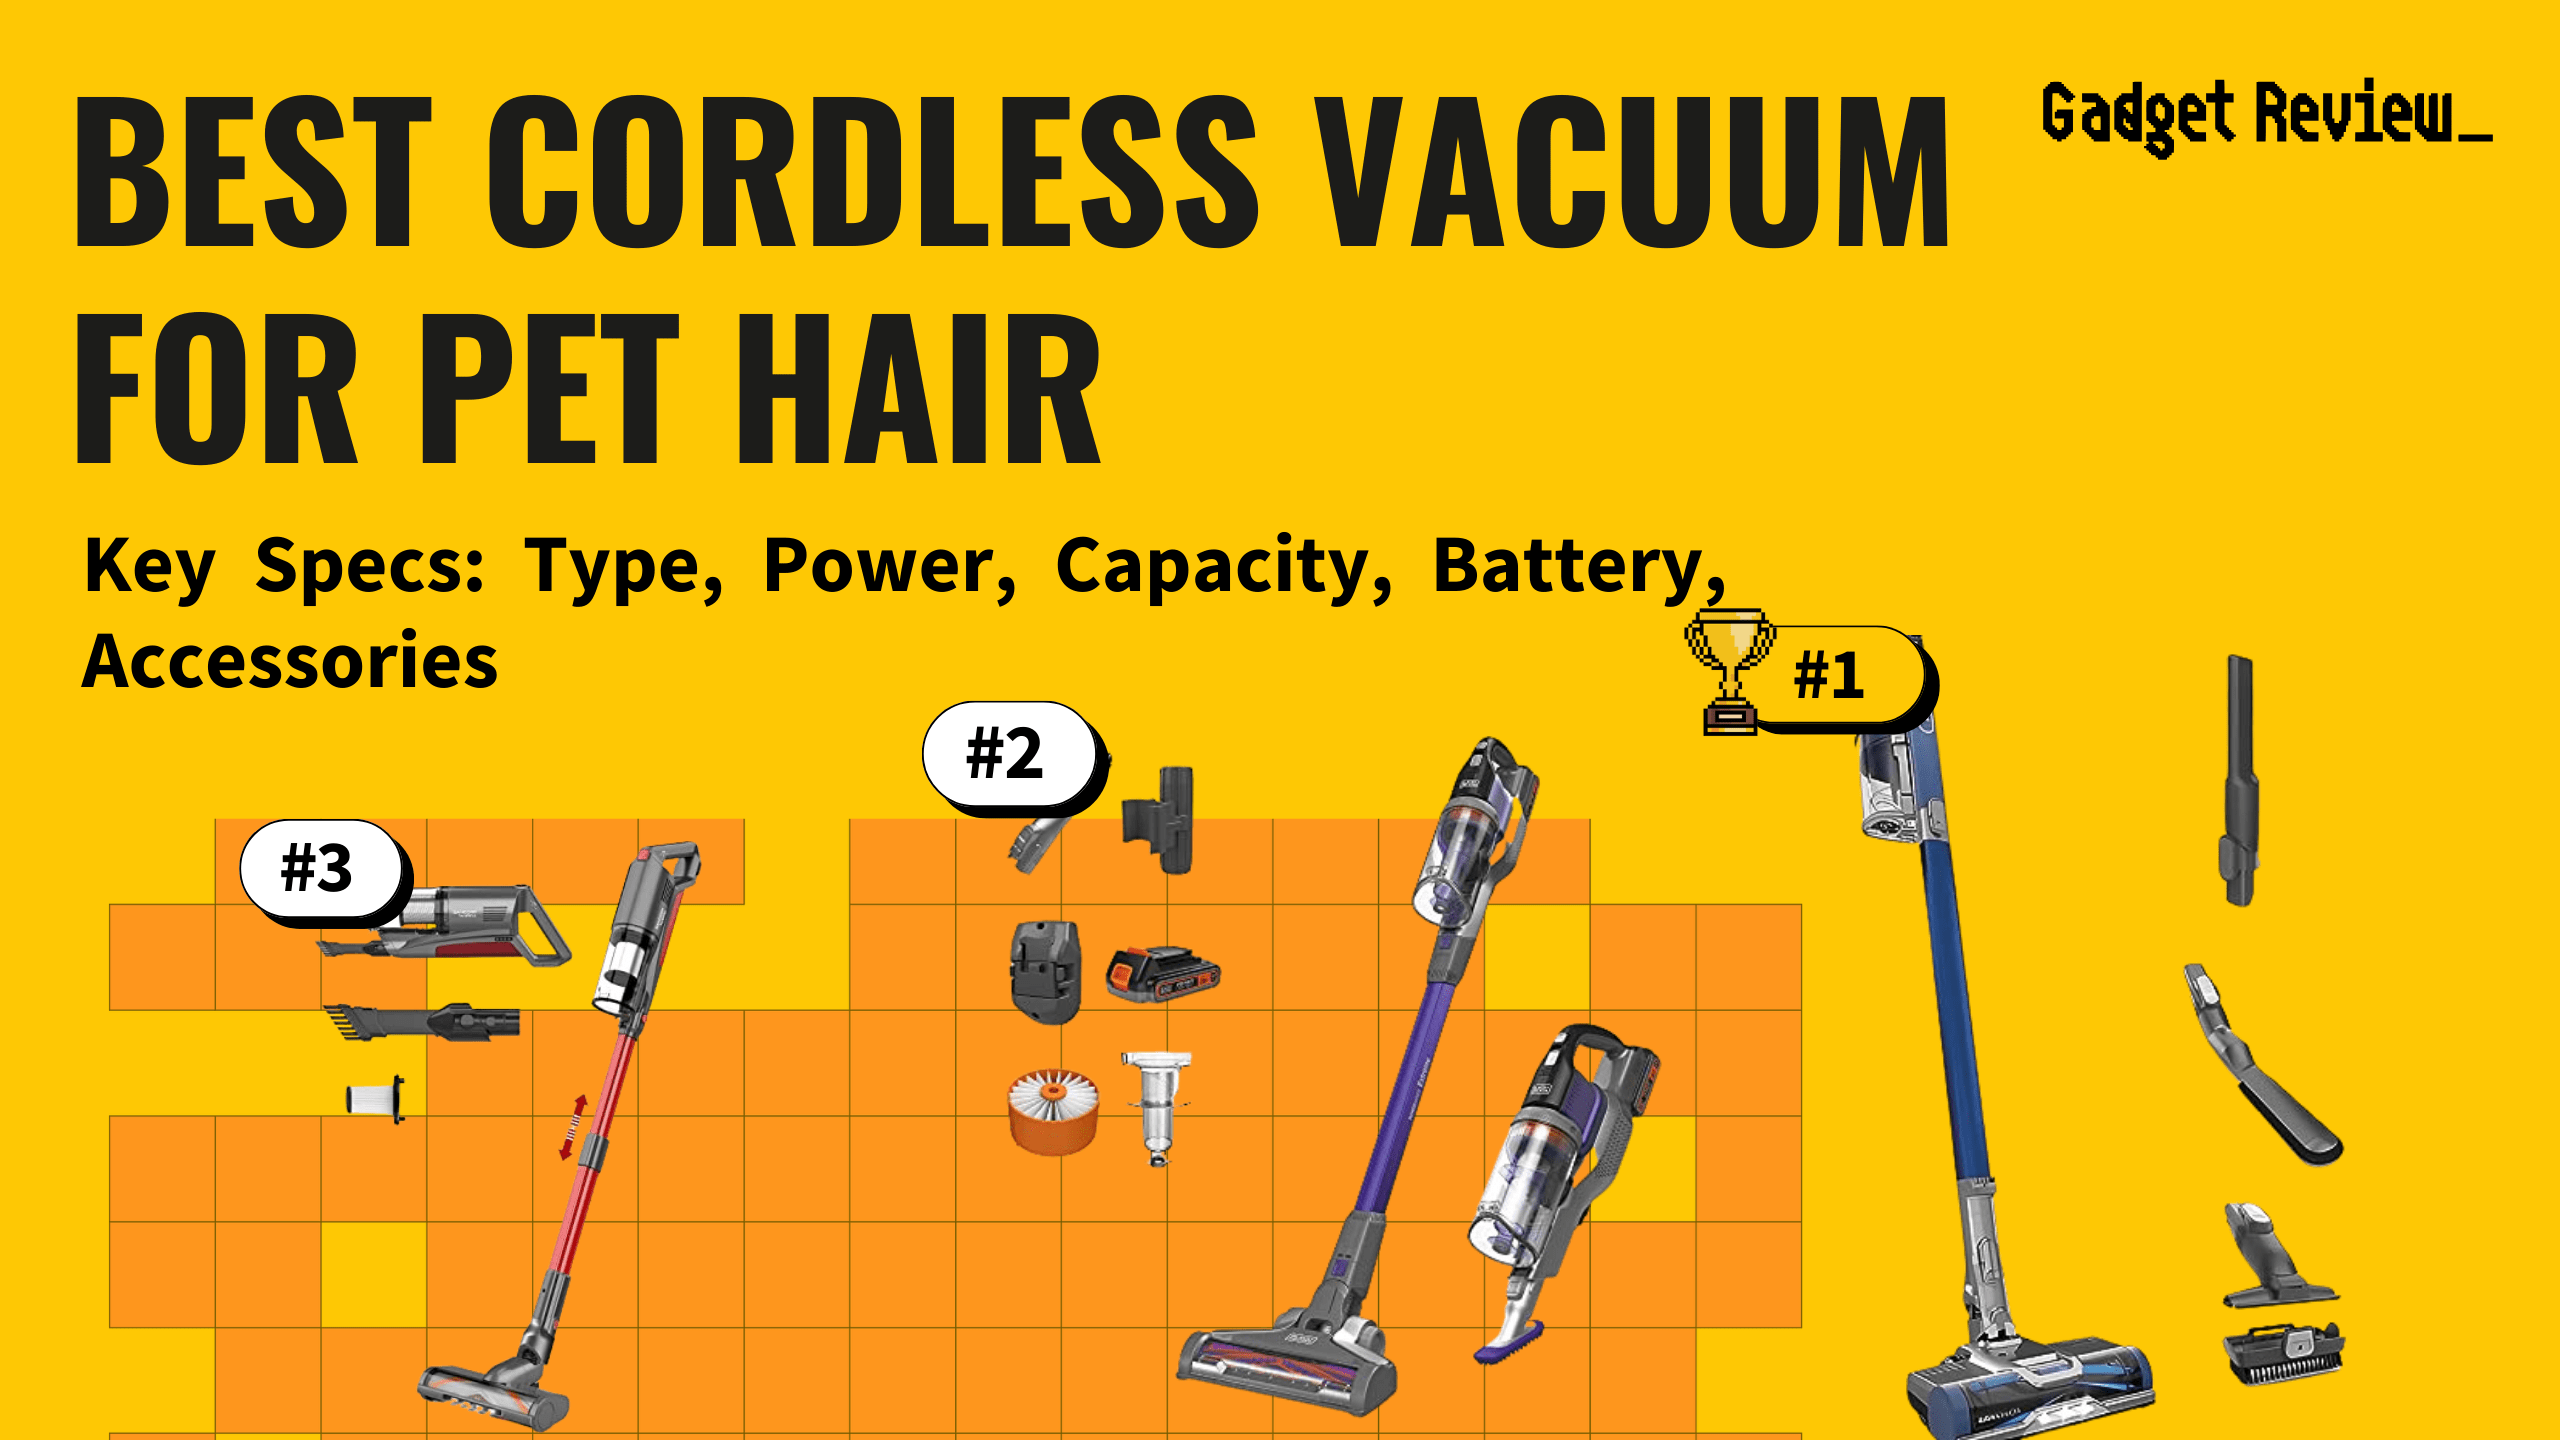 best cordless vacuum for pet hair featured image that shows the top three best vacuum cleaner models